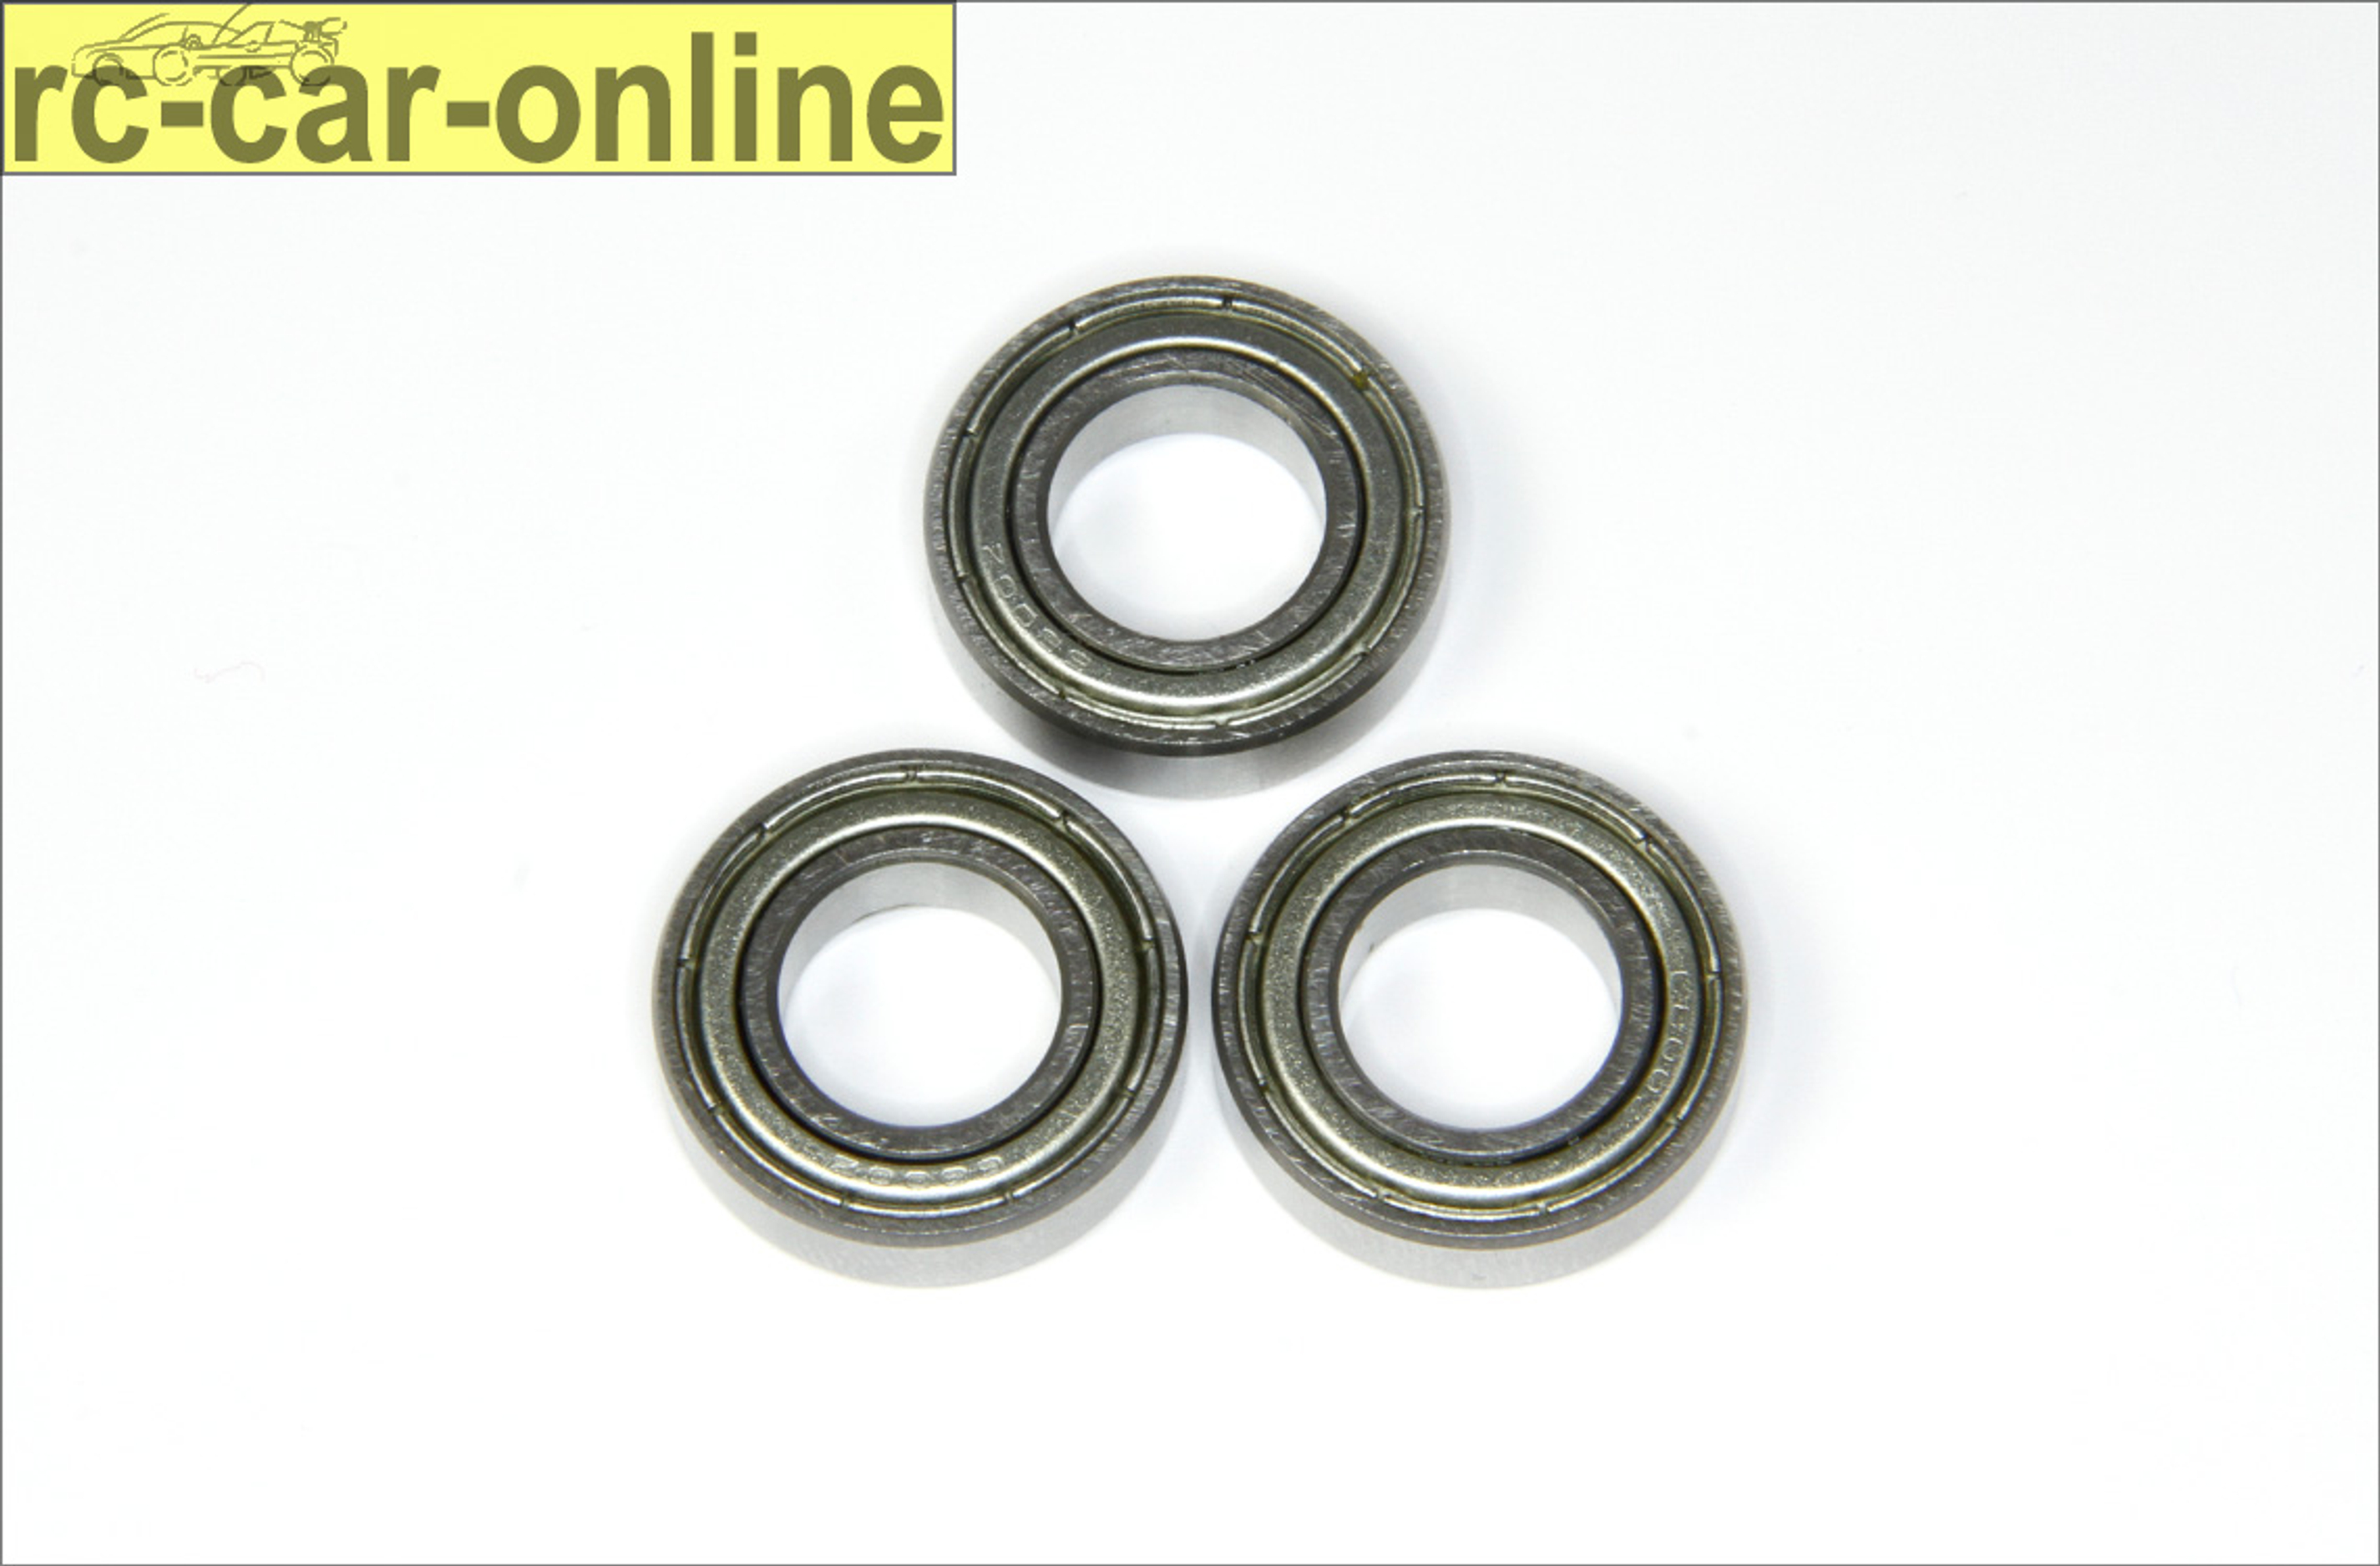 y2012-93/03LL Mecatech low-friction  Bearing 10x19x5, set of 3